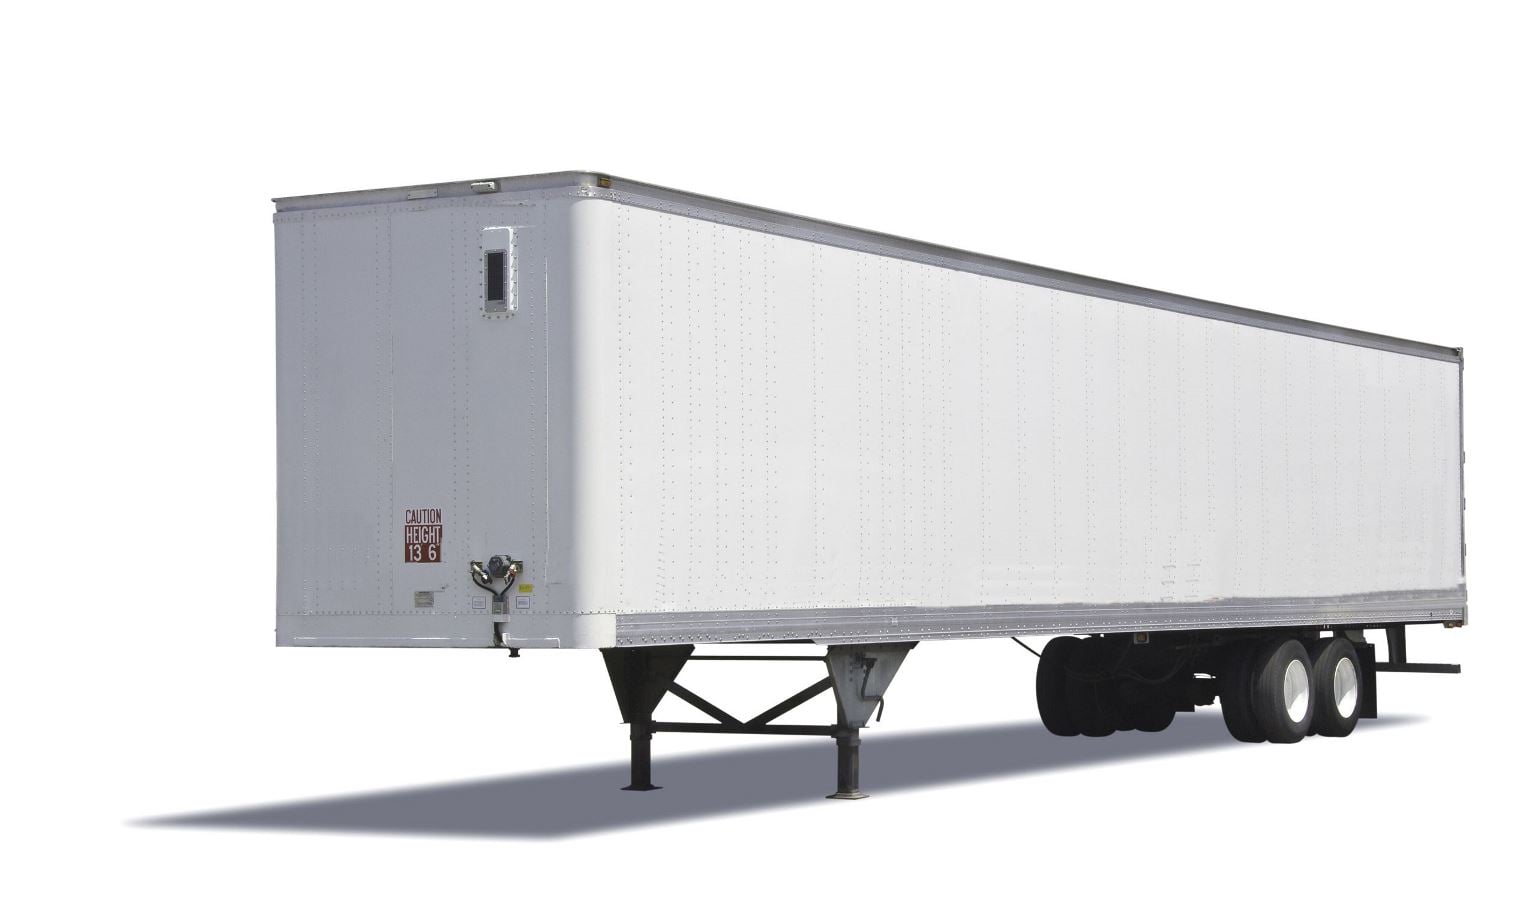 Solar power for untethered truck trailers